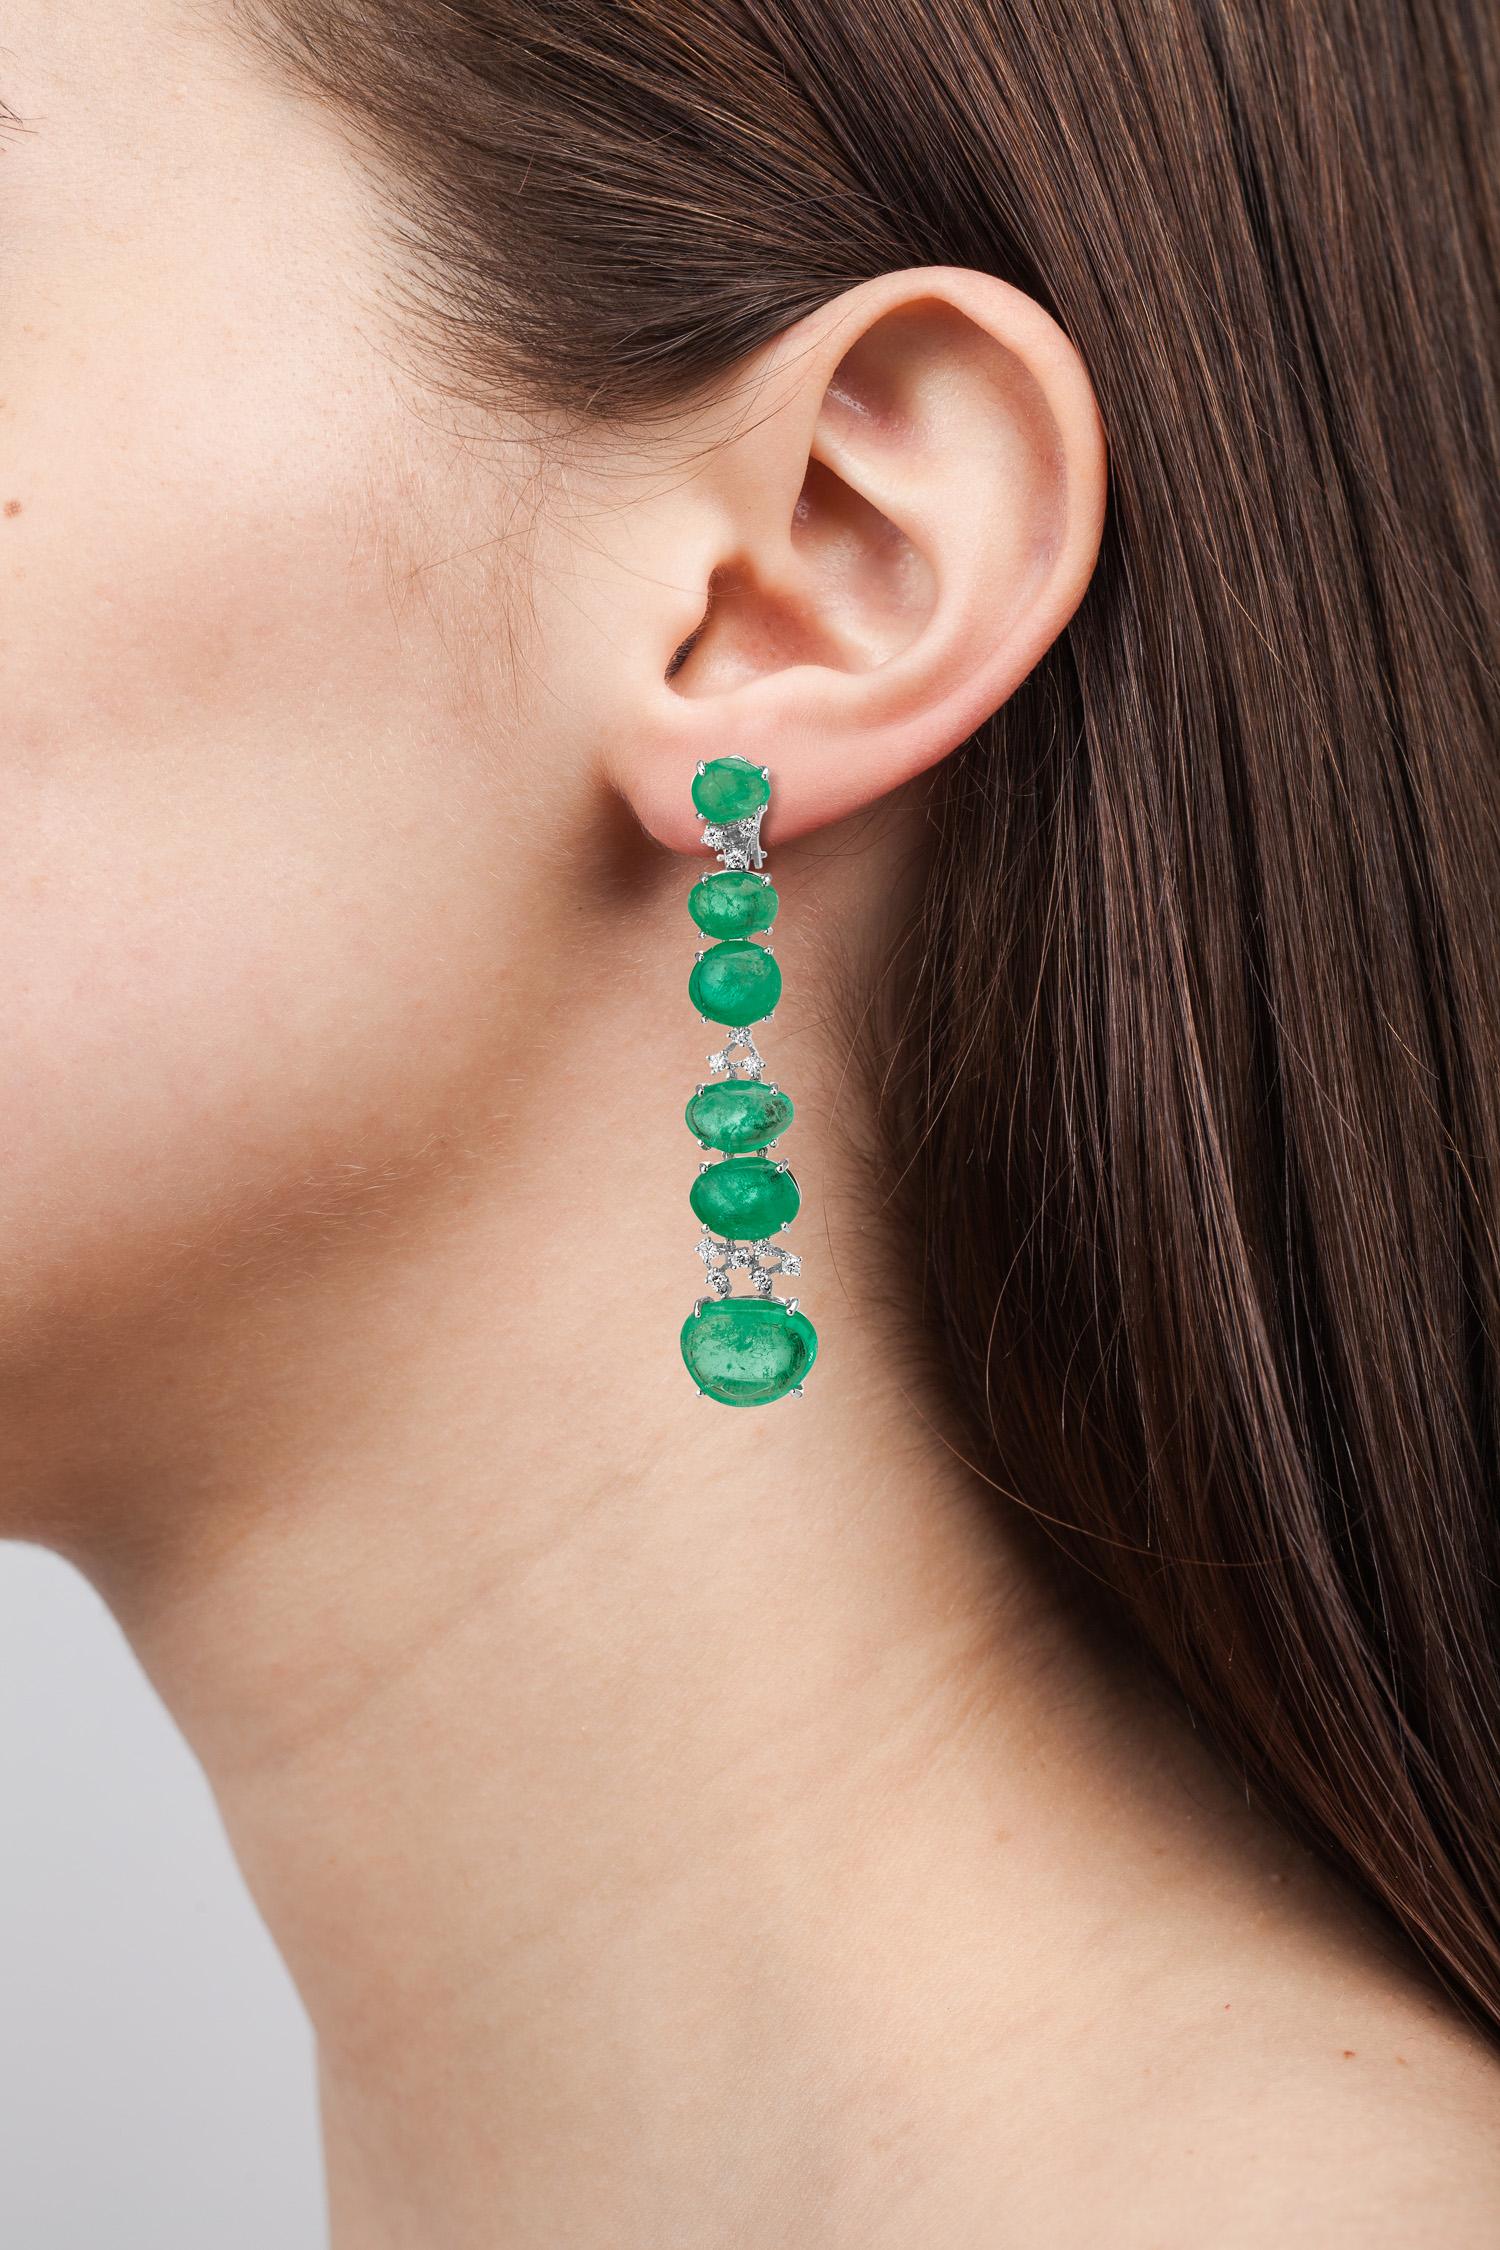 18 Karat white gold long drop claw setting earrings featuring Muzo Colombian emeralds weighing 54 carats and diamonds weighing 0.73 carats 

Muzo Emerald Colombia Heritage Muisca Earrings set with 54 carats Emerald

Named in honor of the ancient